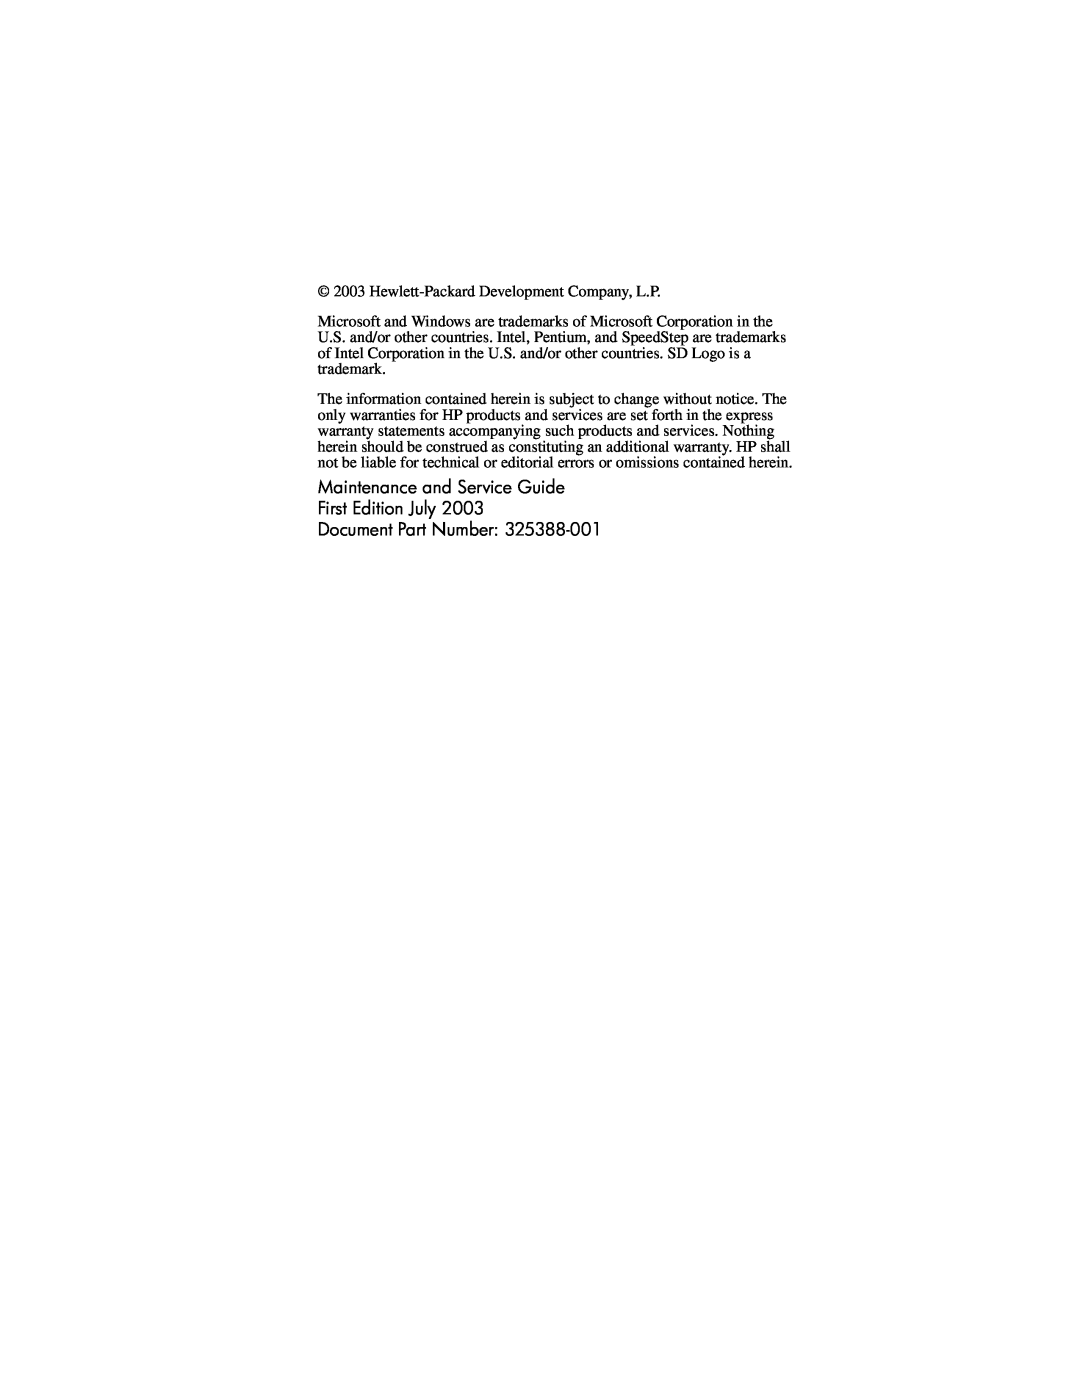 HP nx7000, X1000 manual Maintenance and Service Guide First Edition July Document Part Number 